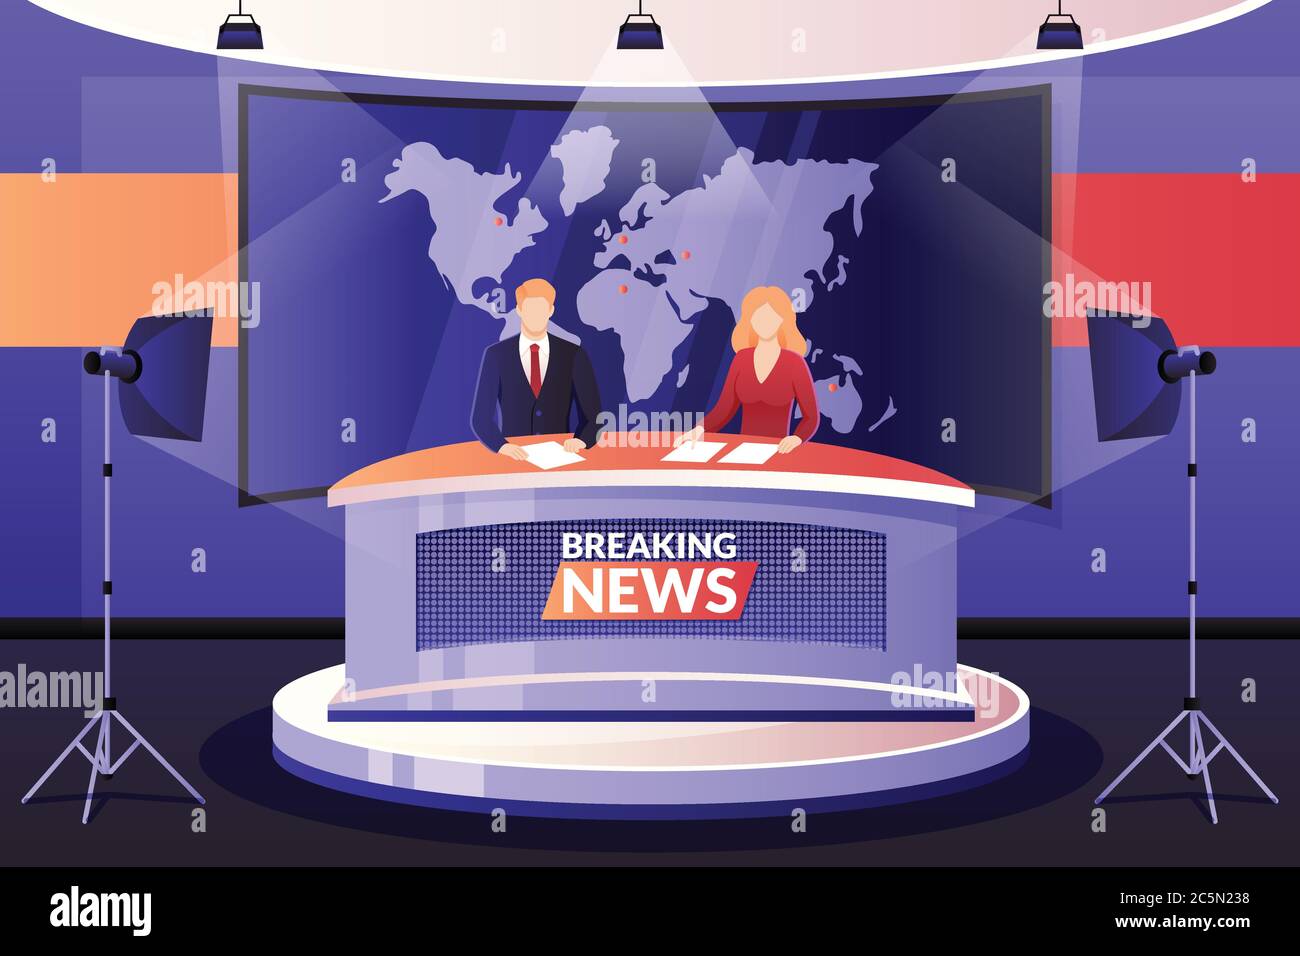 TV breaking news broadcasting, vector illustration. Man and woman media broadcasters talking in television studio. Professional anchormen characters. Stock Vector